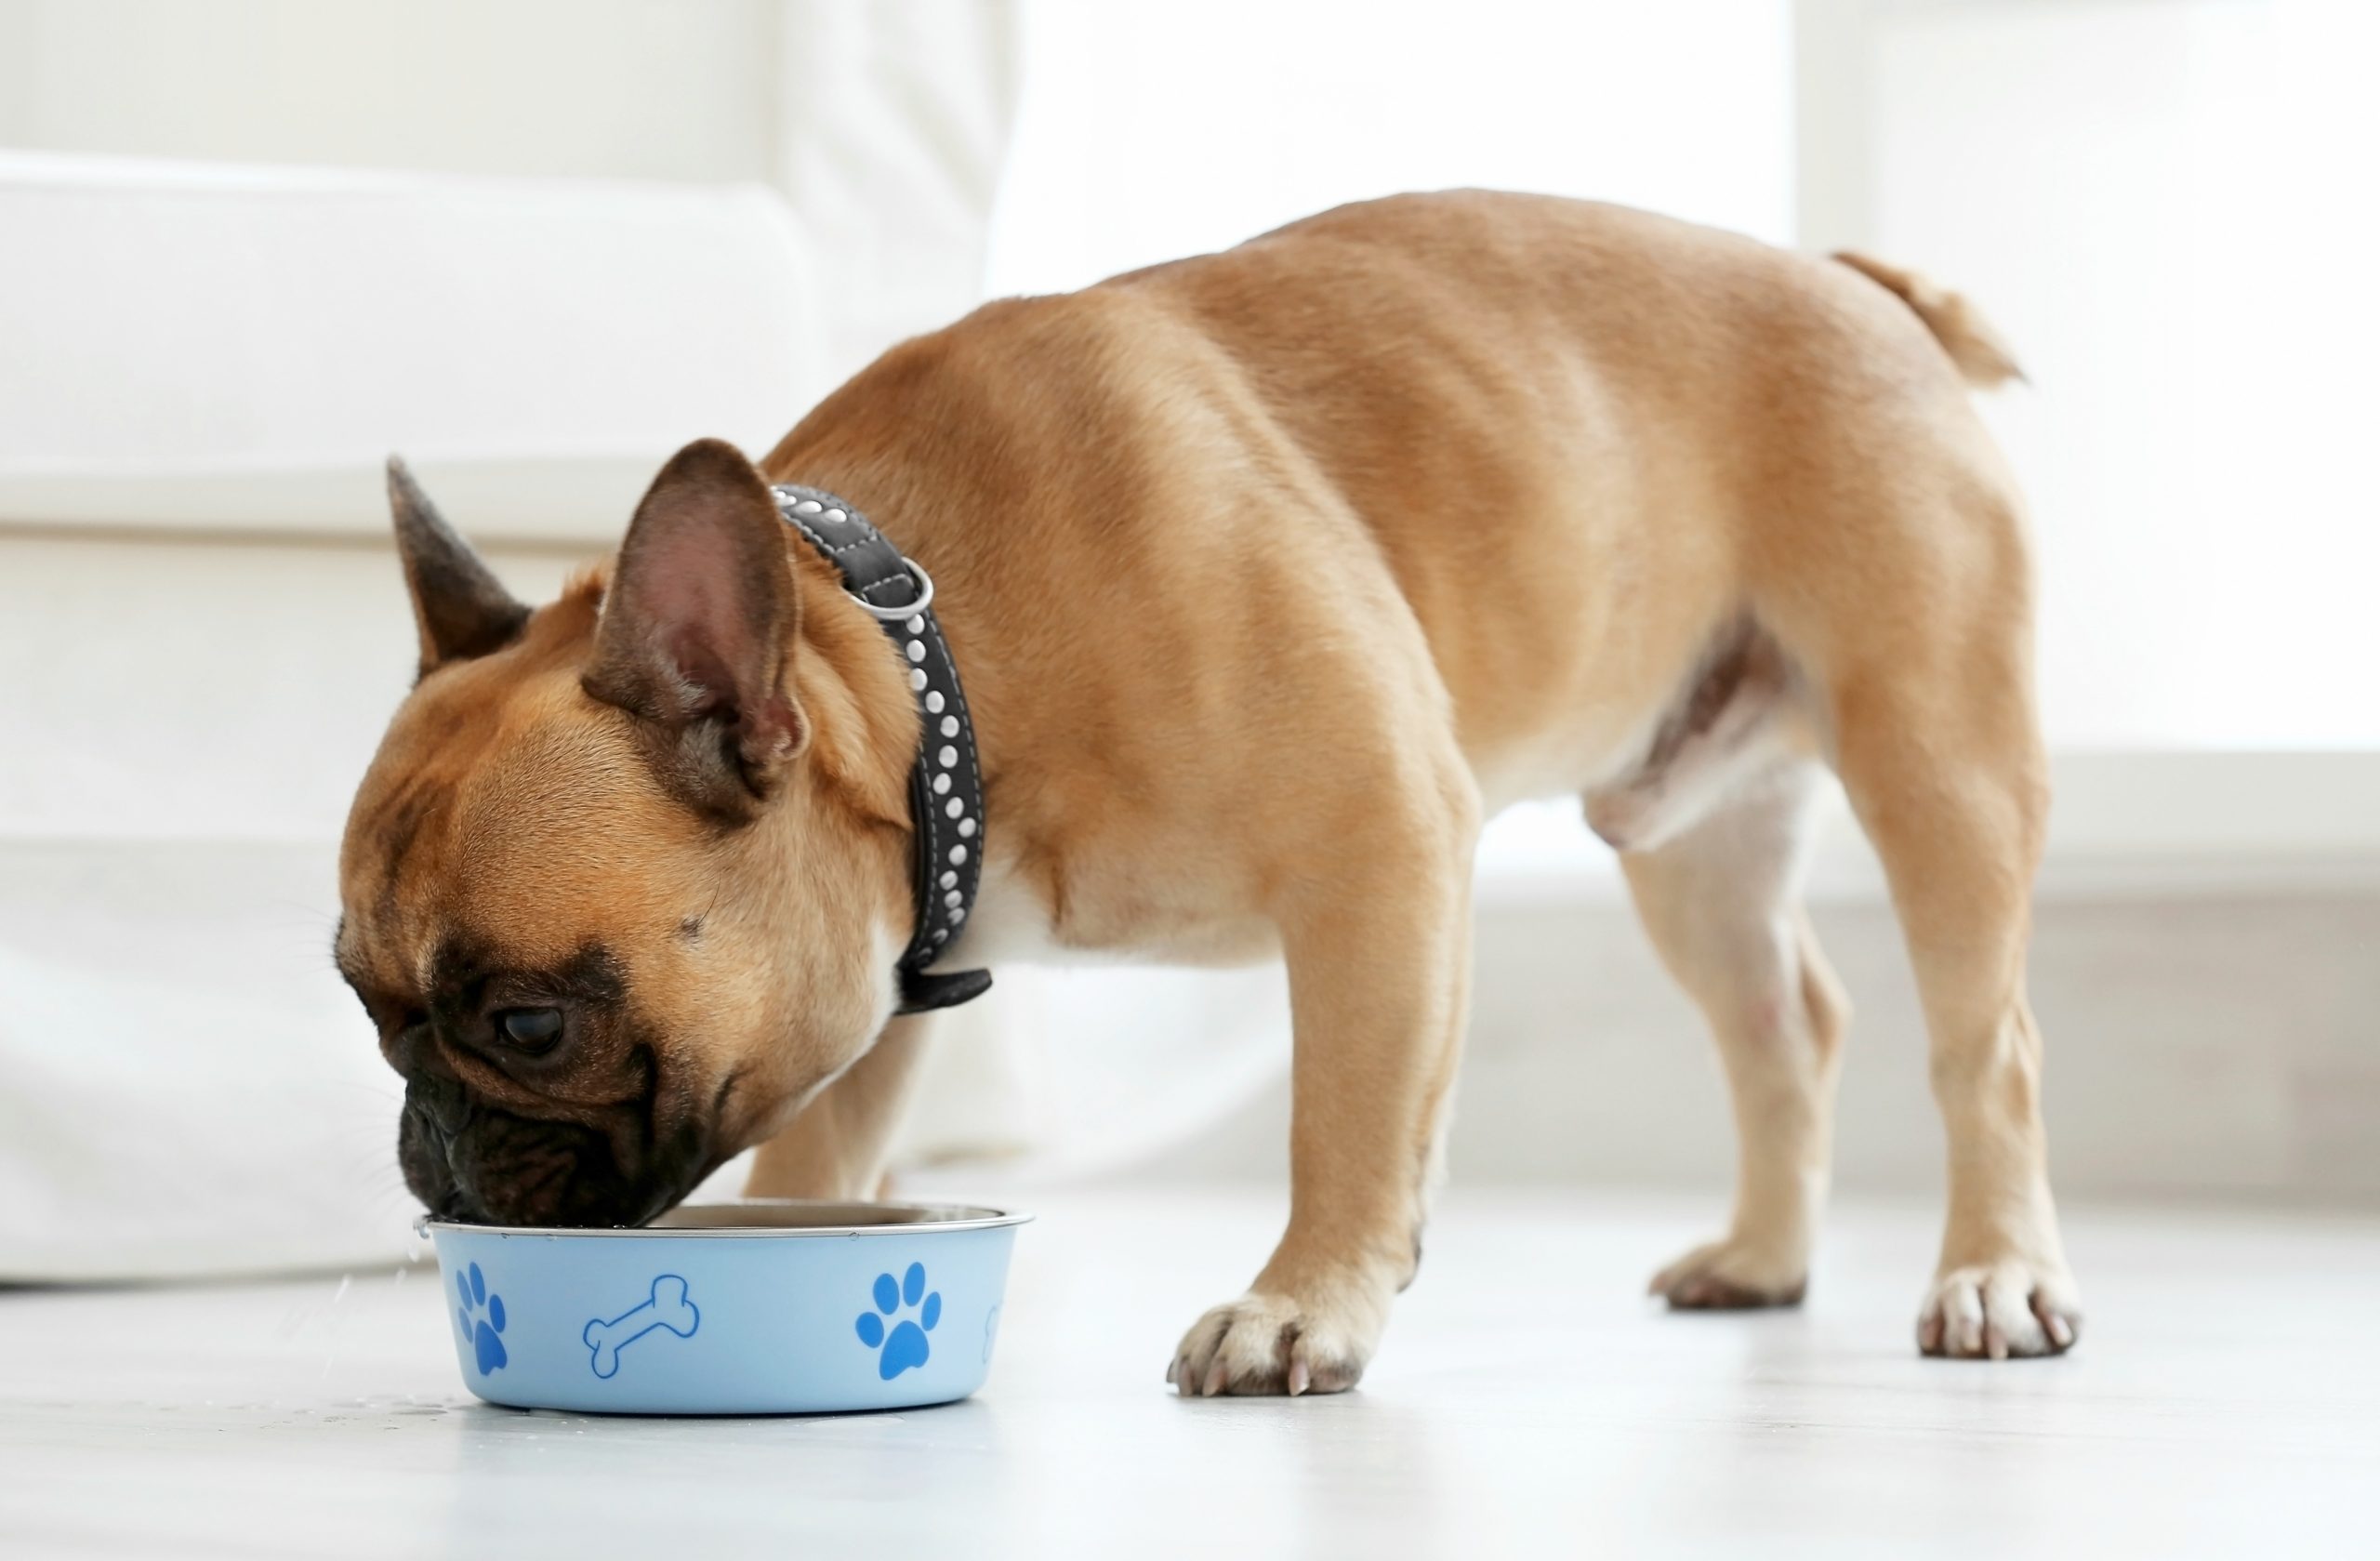 Dog eating food from a bowl